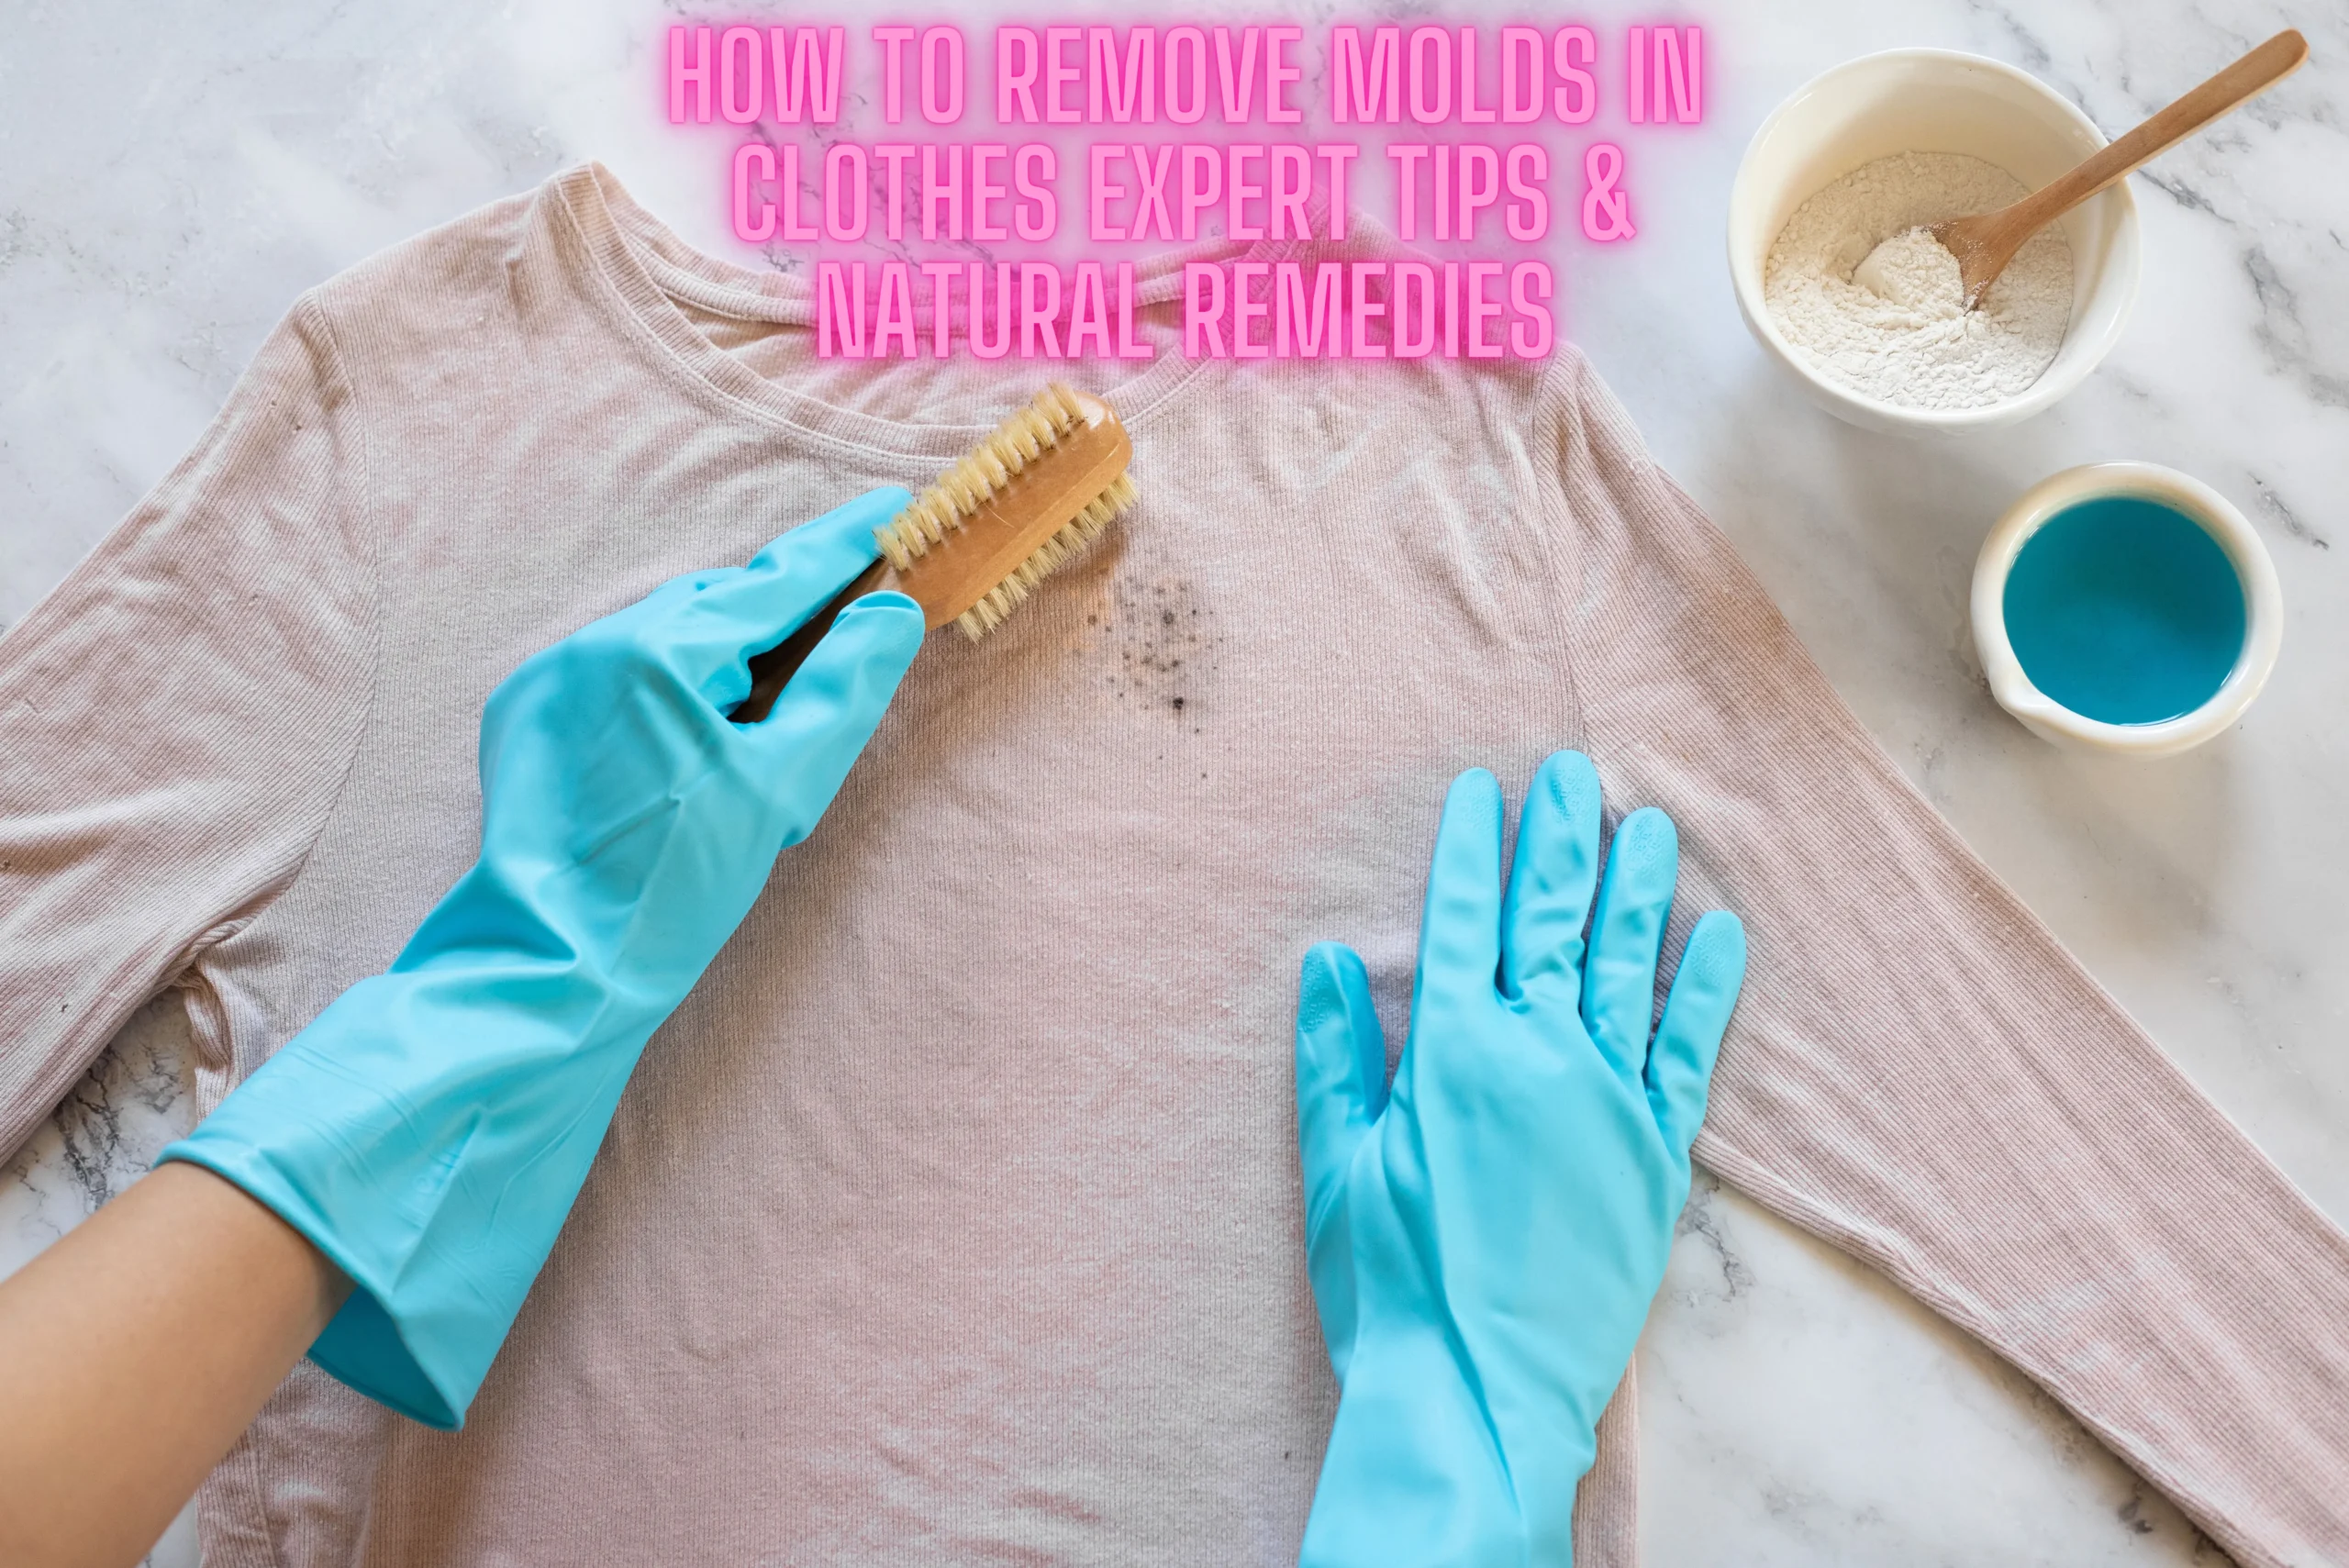 How To Remove Molds In Clothes Expert Tips & Natural Remedies